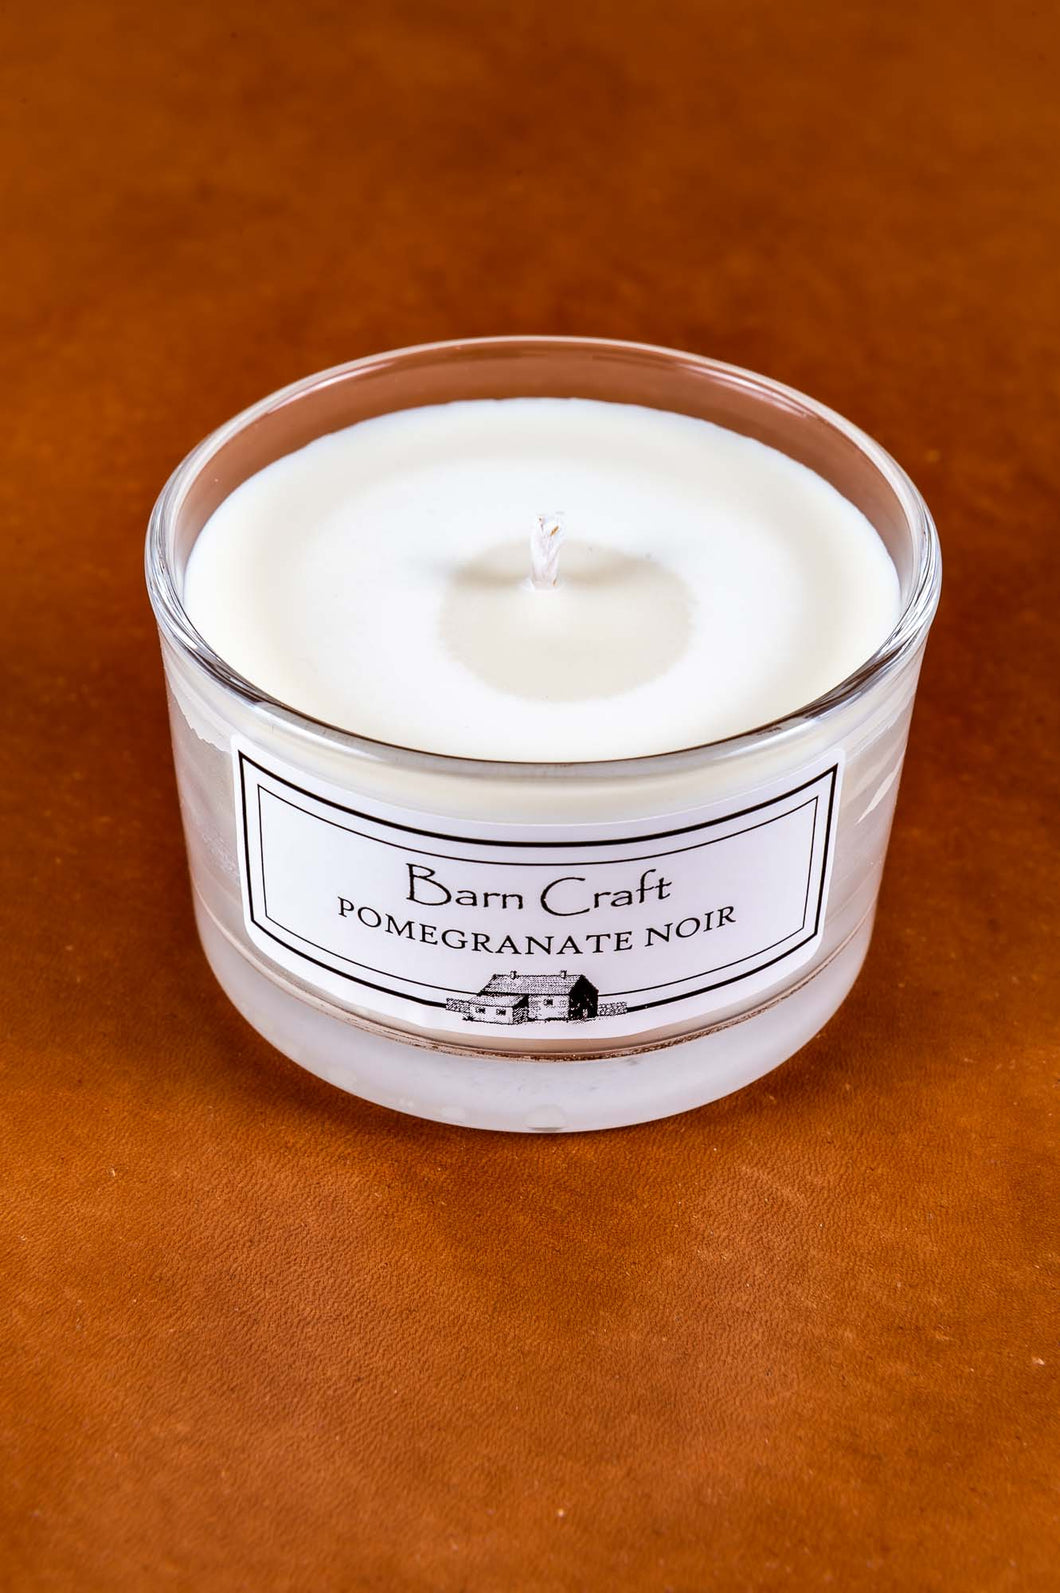 Pomegranate Noir scented soy wax candle